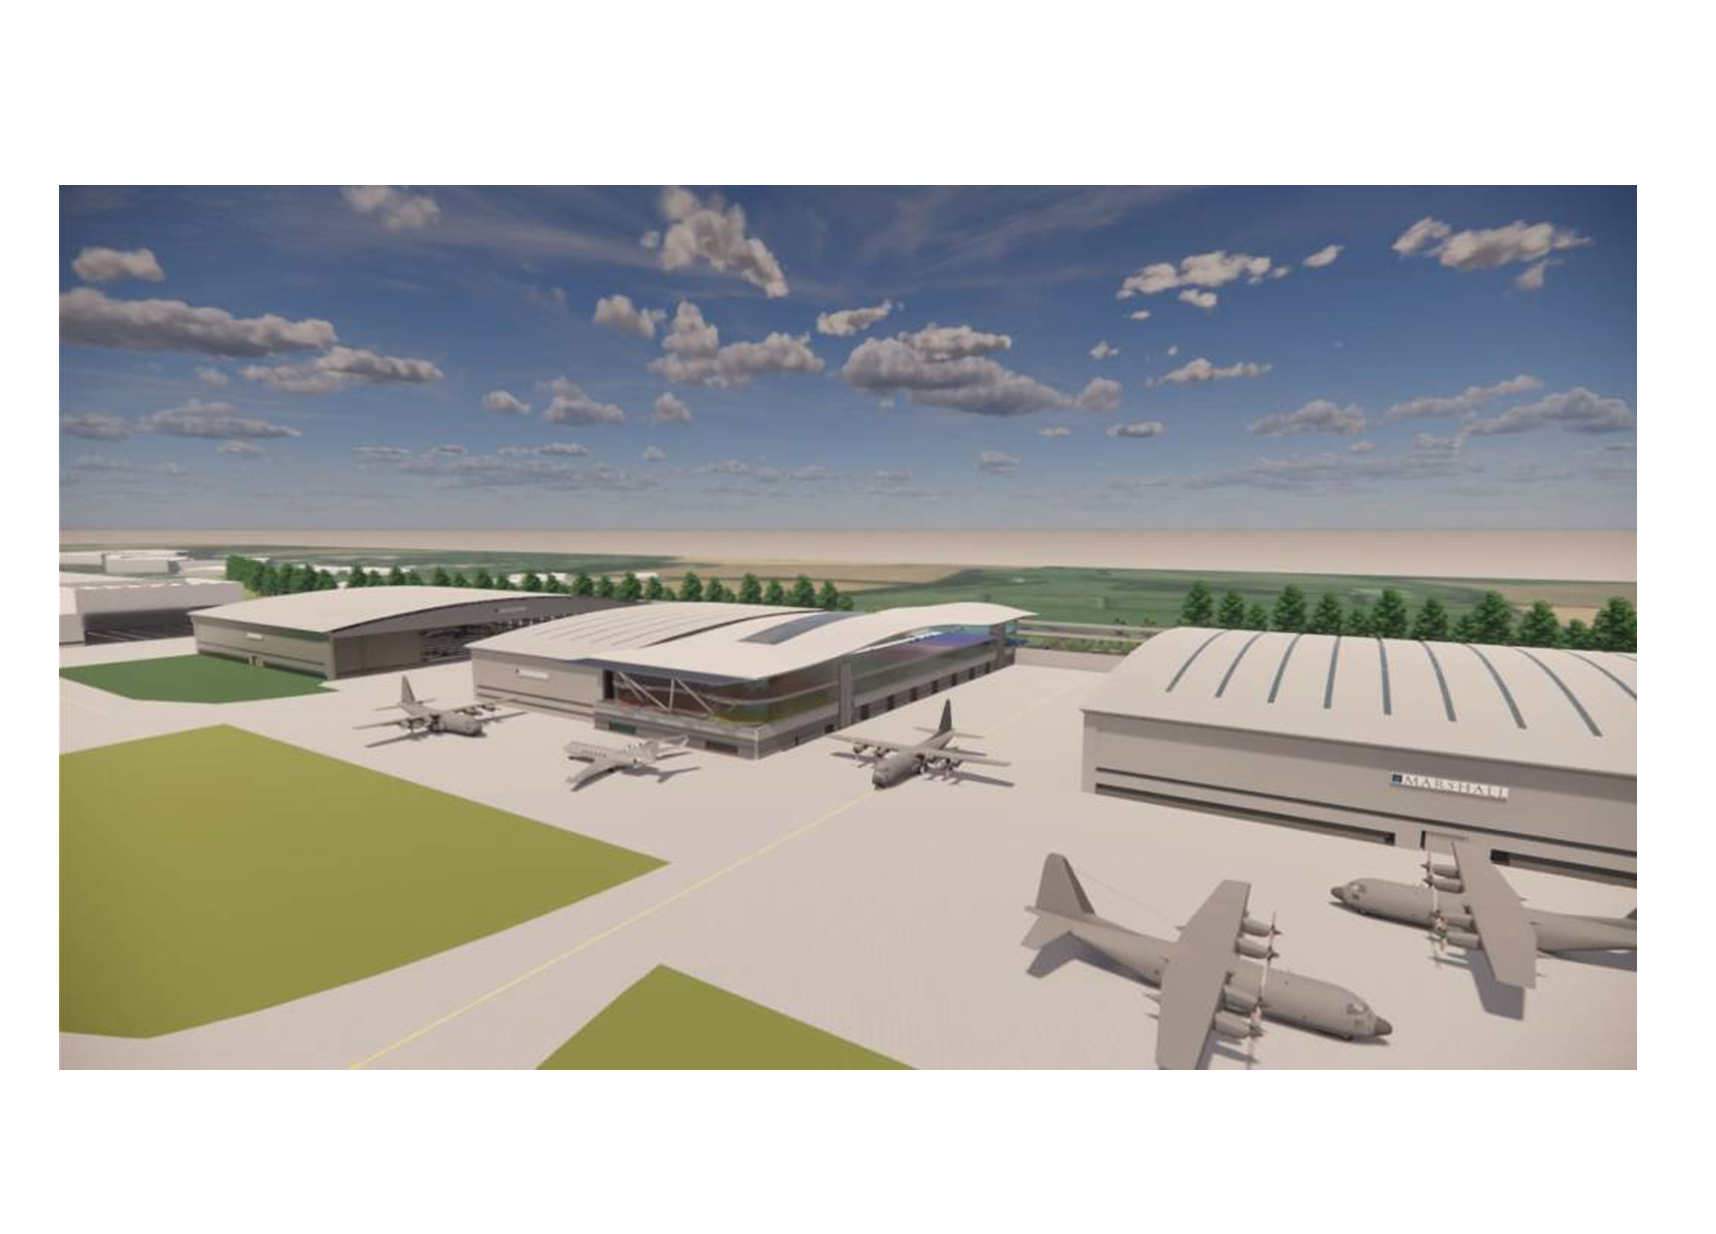 Marshall Aerospace gets green light for Cranfield relocation